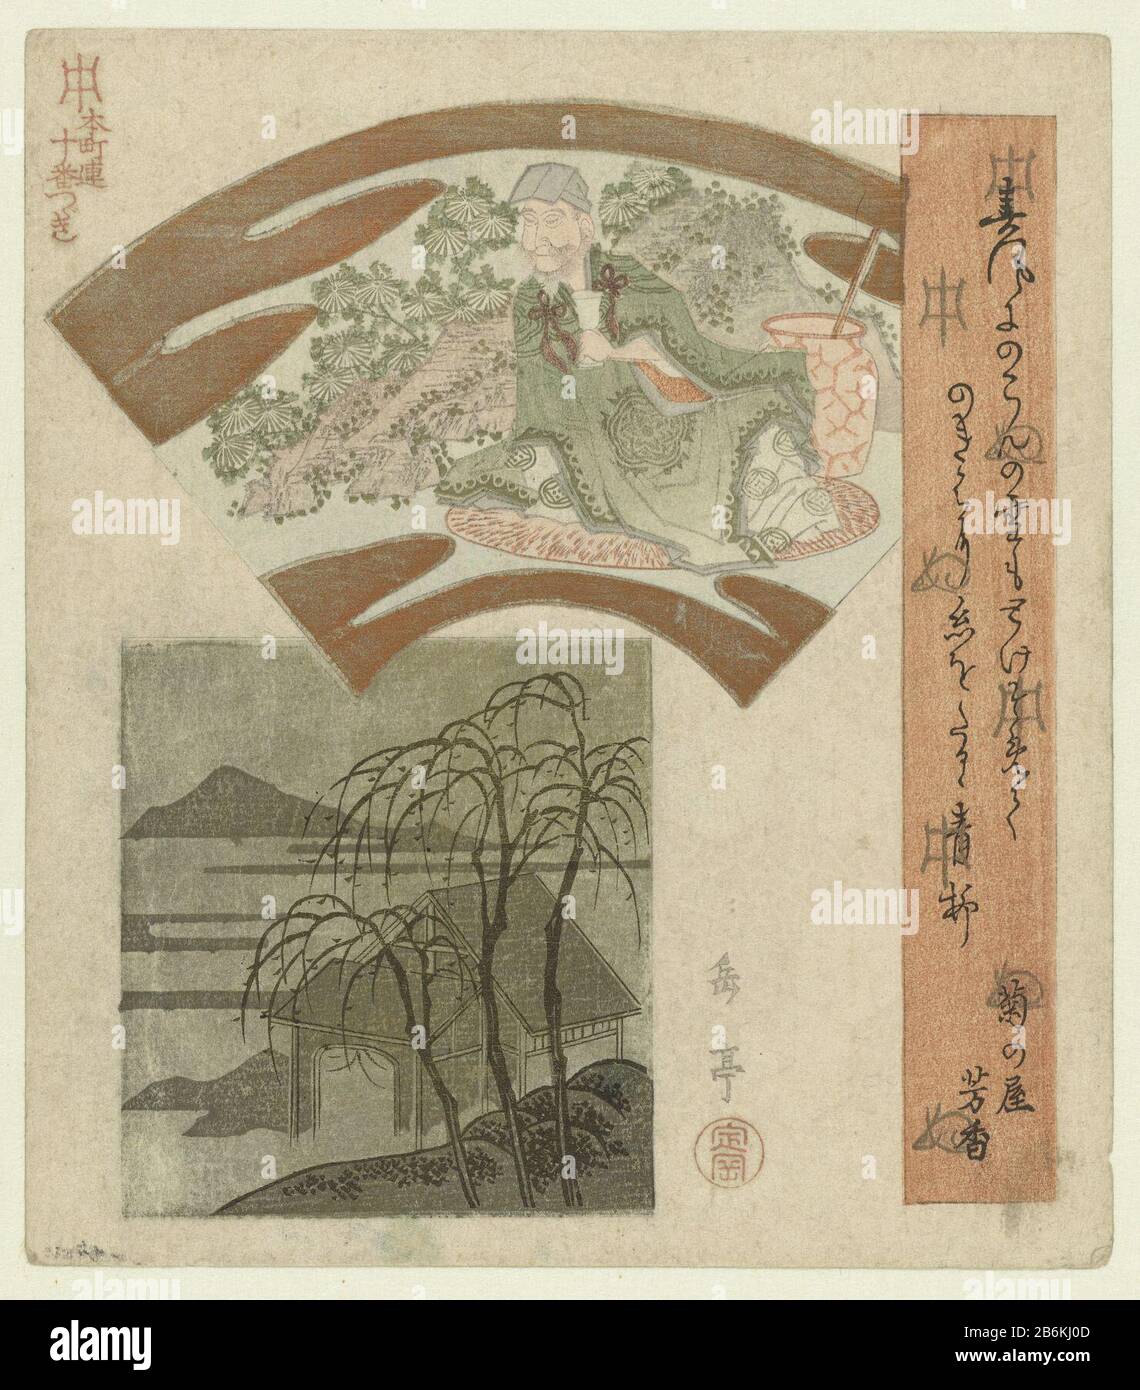 a fan-shaped cartridge is depicted a Chinese philosopher, drinking wine out of a big barrel, against a background of chrysanthemums on a mountain. The square cartouche depicts a landscape with willow trees and a pavilion. With one gedicht. Manufacturer : printmaker: Yashima Gakutei (listed building) poet Kikunoya Yoshika (listed property) Place manufacture: Japan Date: 1823 - 1828 Physical characteristics: color woodblock; embossing; line block in black with color blocks; metallic pigment material: paper Technique: color woodblock / embossing Dimensions: sheet: H 212 mm (shikishiban) × b 187 m Stock Photo